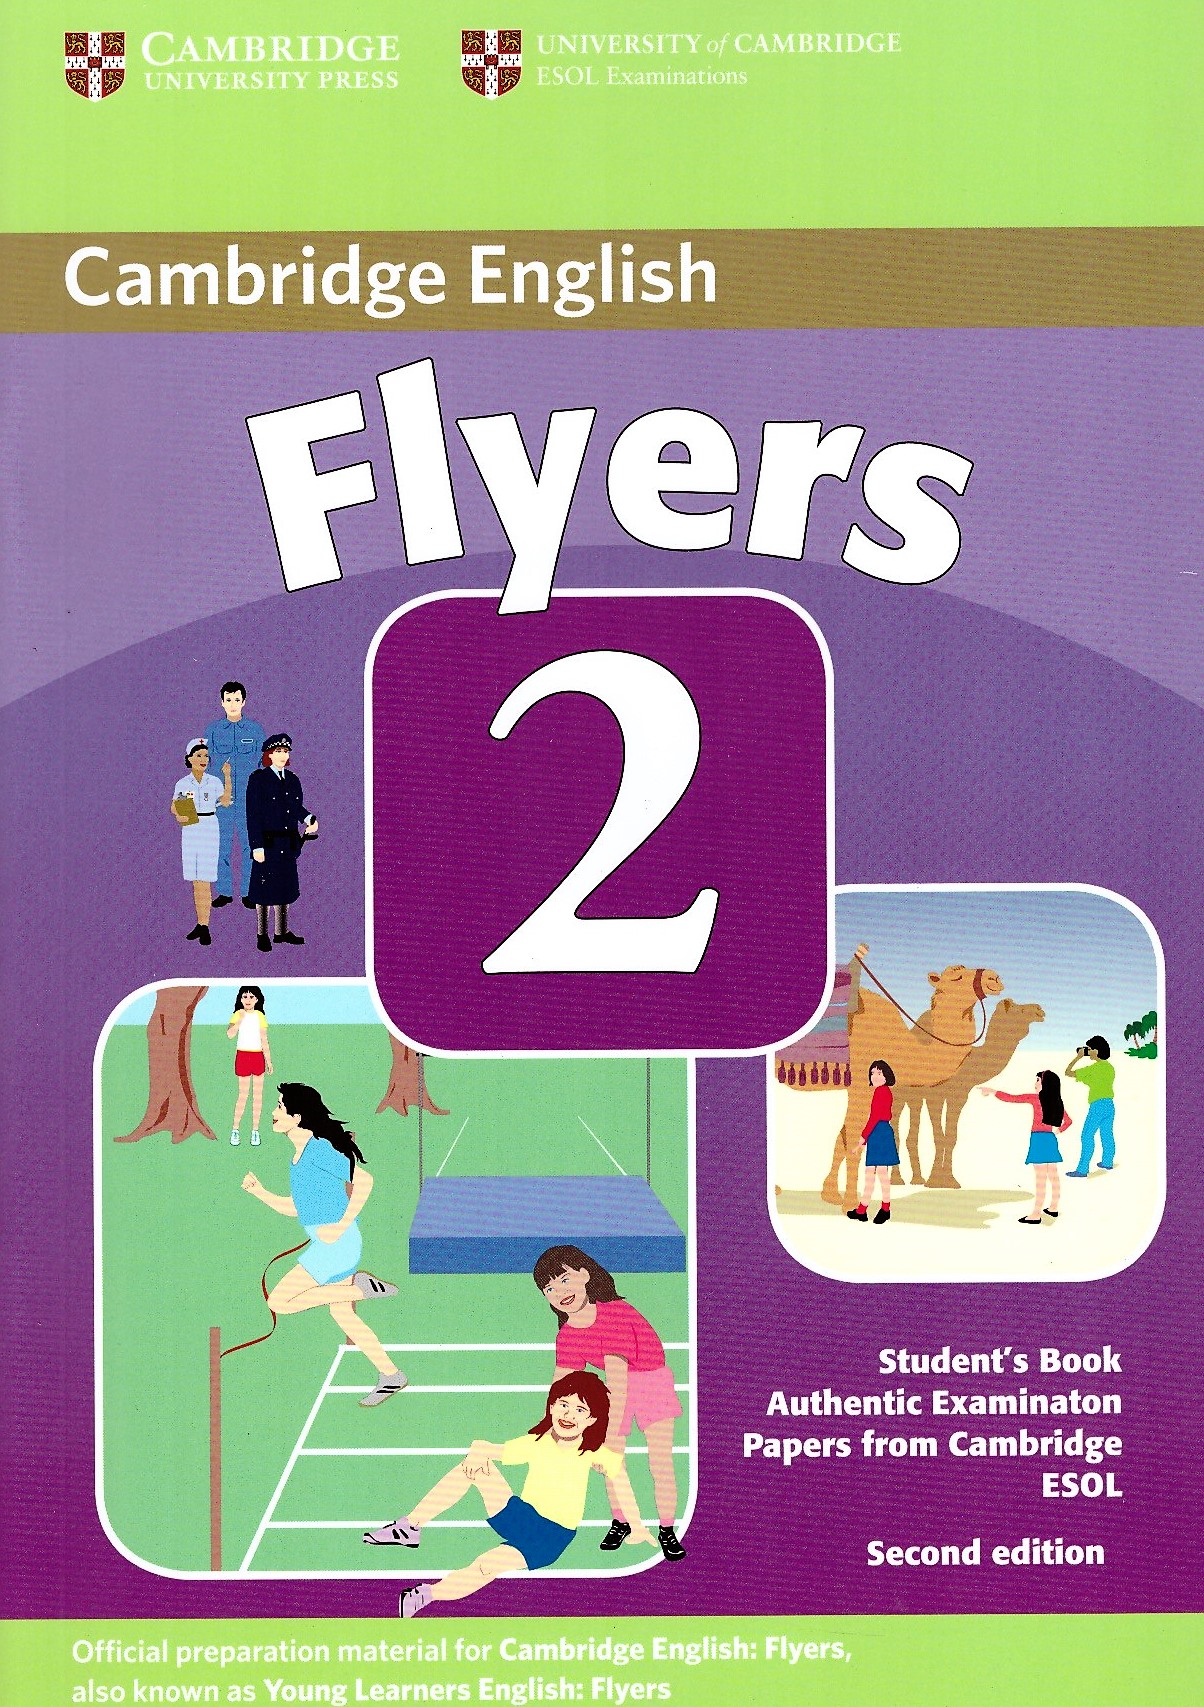 Английский язык test book. Flyers. Flyers Cambridge Test. Cambridge young Learners English Tests (Flyers);. Cambridge young Learners books.